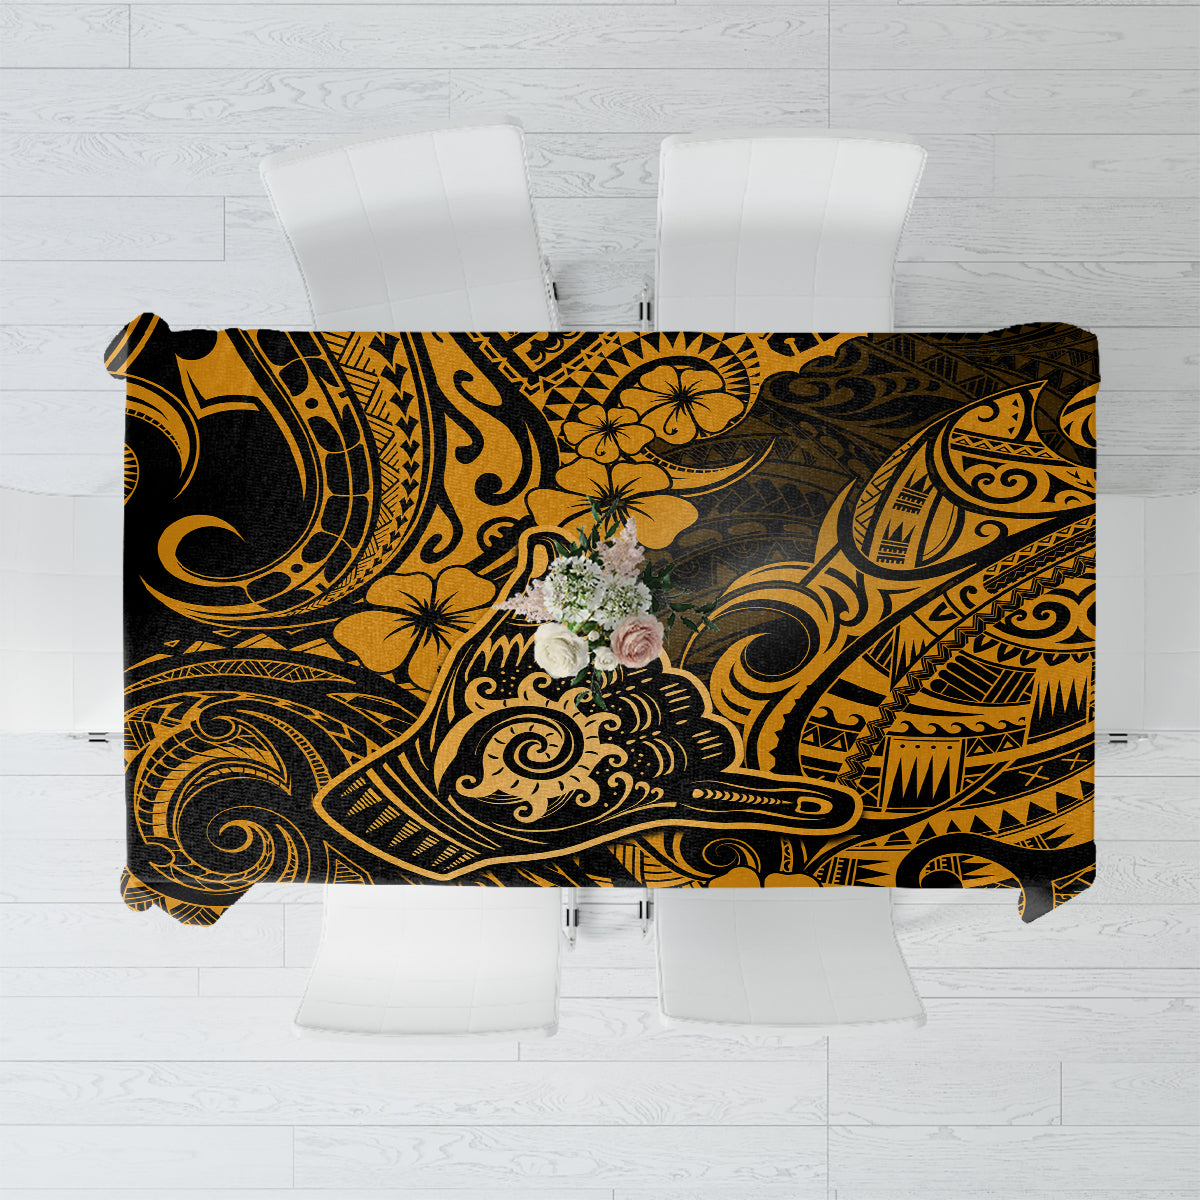 Hawaii Shaka Sign Tablecloth With Polynesian Hibiscus Gold Unique LT01 Gold - Polynesian Pride